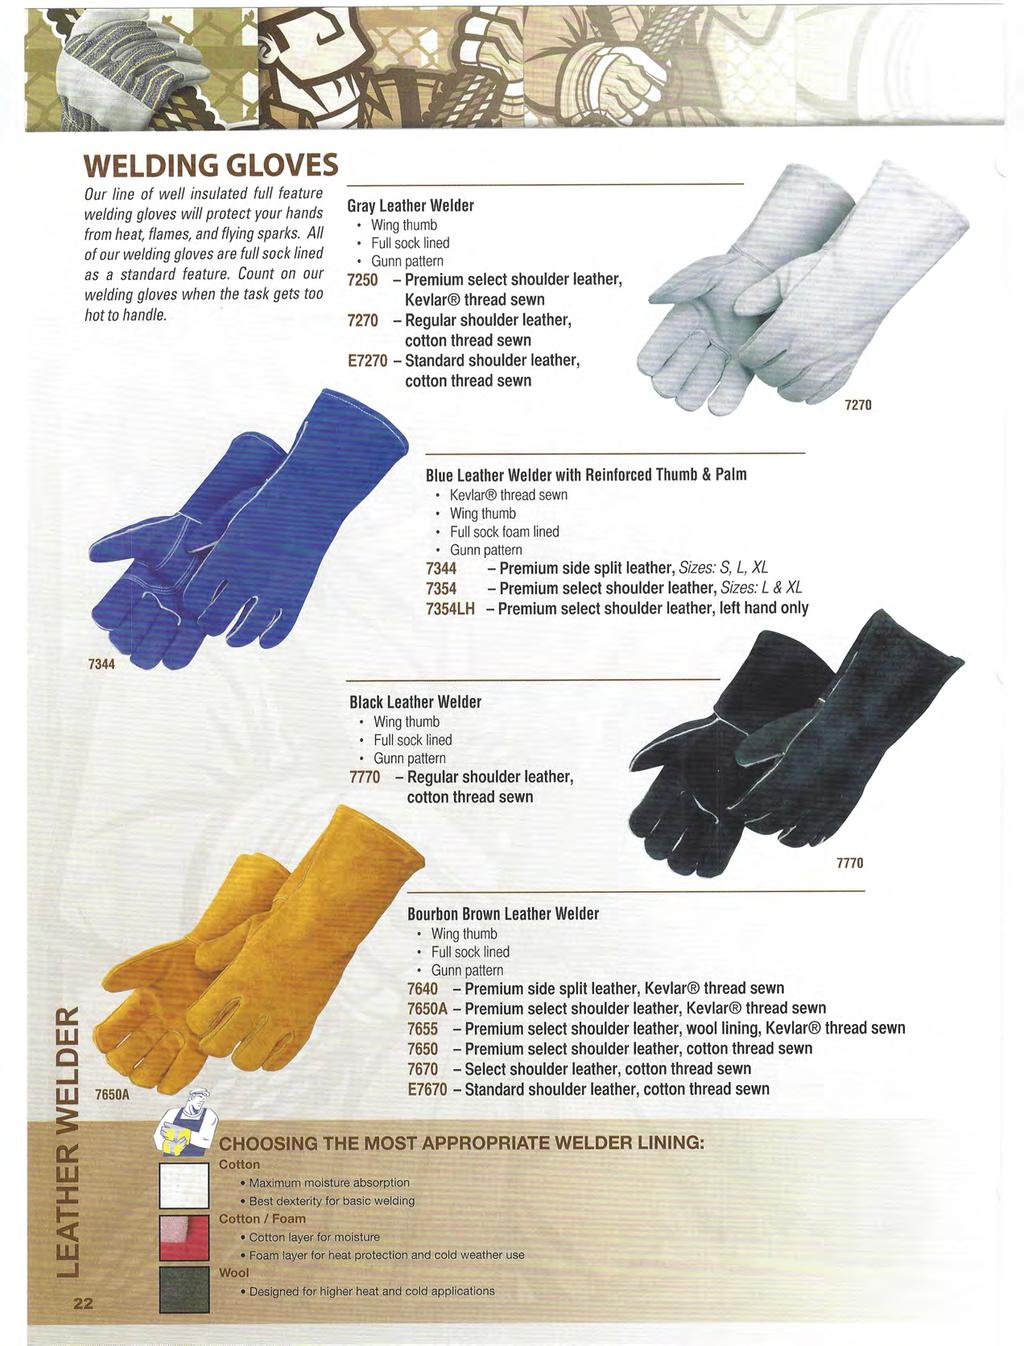 WELDING GLOVES Our line of well insulated full feature welding gloves will protect your hands from heat, flames, and flying sparks. All of our welding gloves are full sock lined as a standard feature.